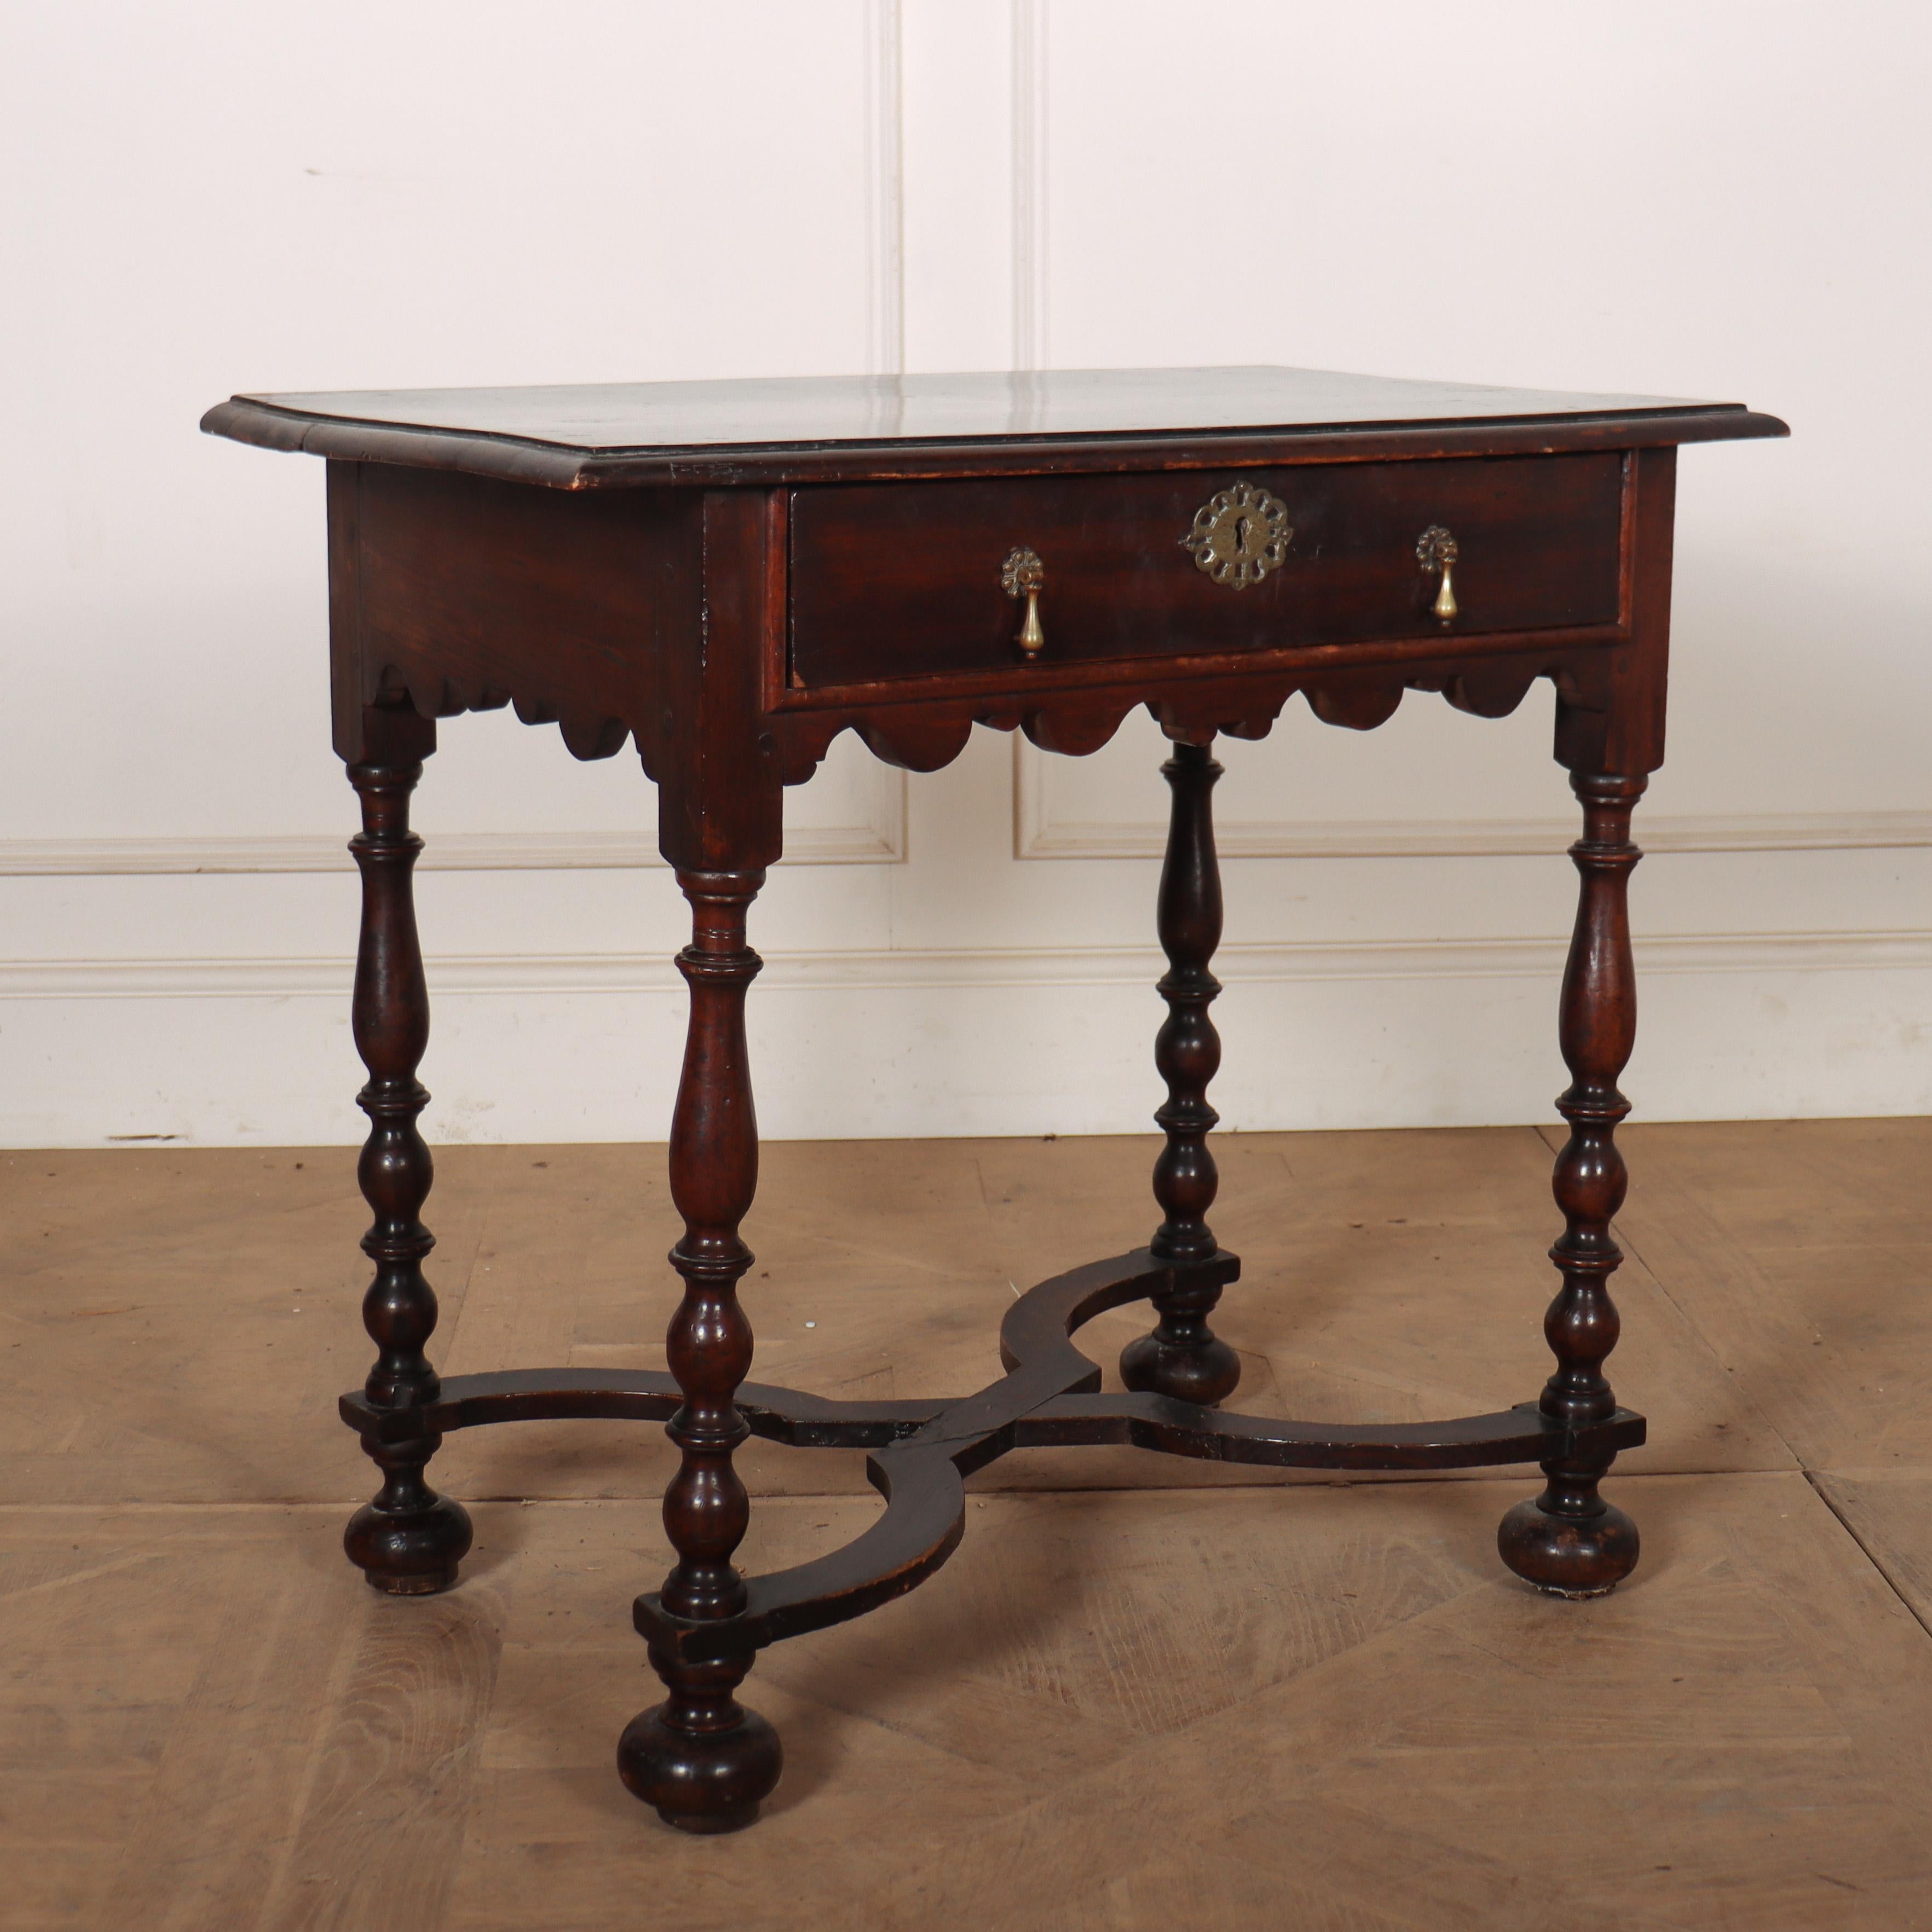 Early 18th C English oak and pine side / lamp table. 1720.

Reference: 8326

Dimensions
31 inches (79 cms) Wide
18.5 inches (47 cms) Deep
28.5 inches (72 cms) High